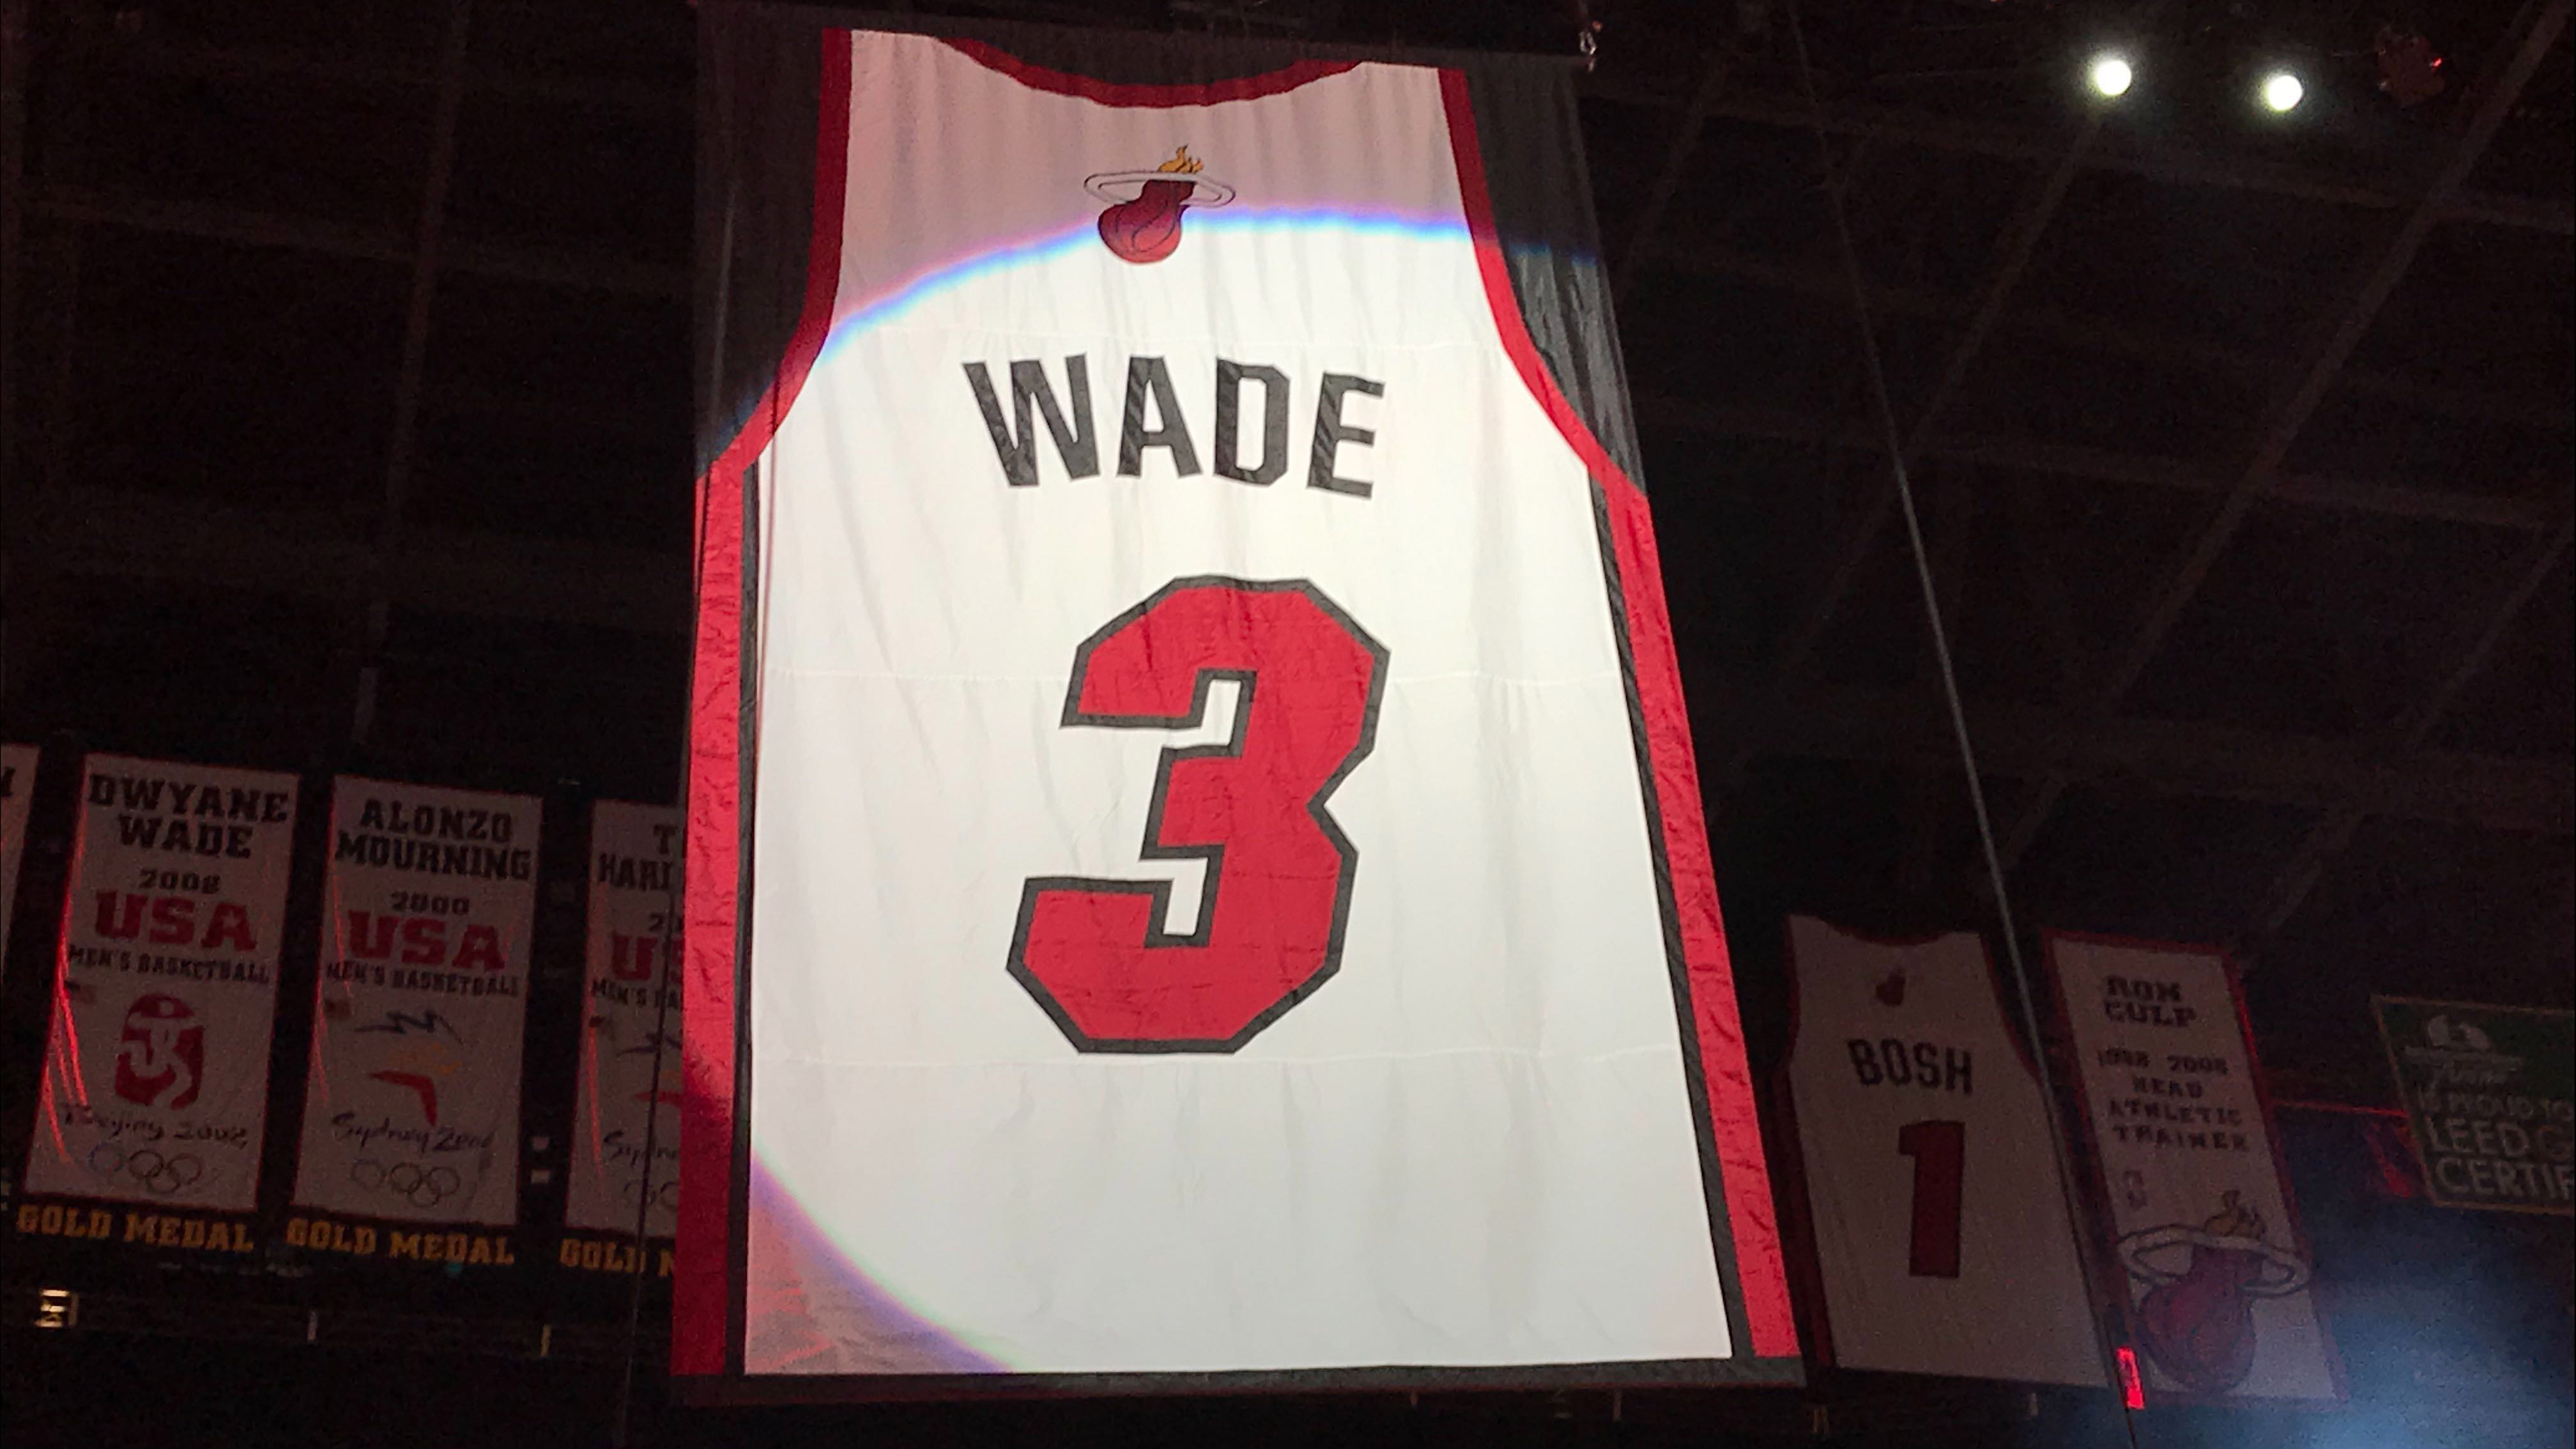 Dwyane Wade number retirement. Do we have to wait until he retires